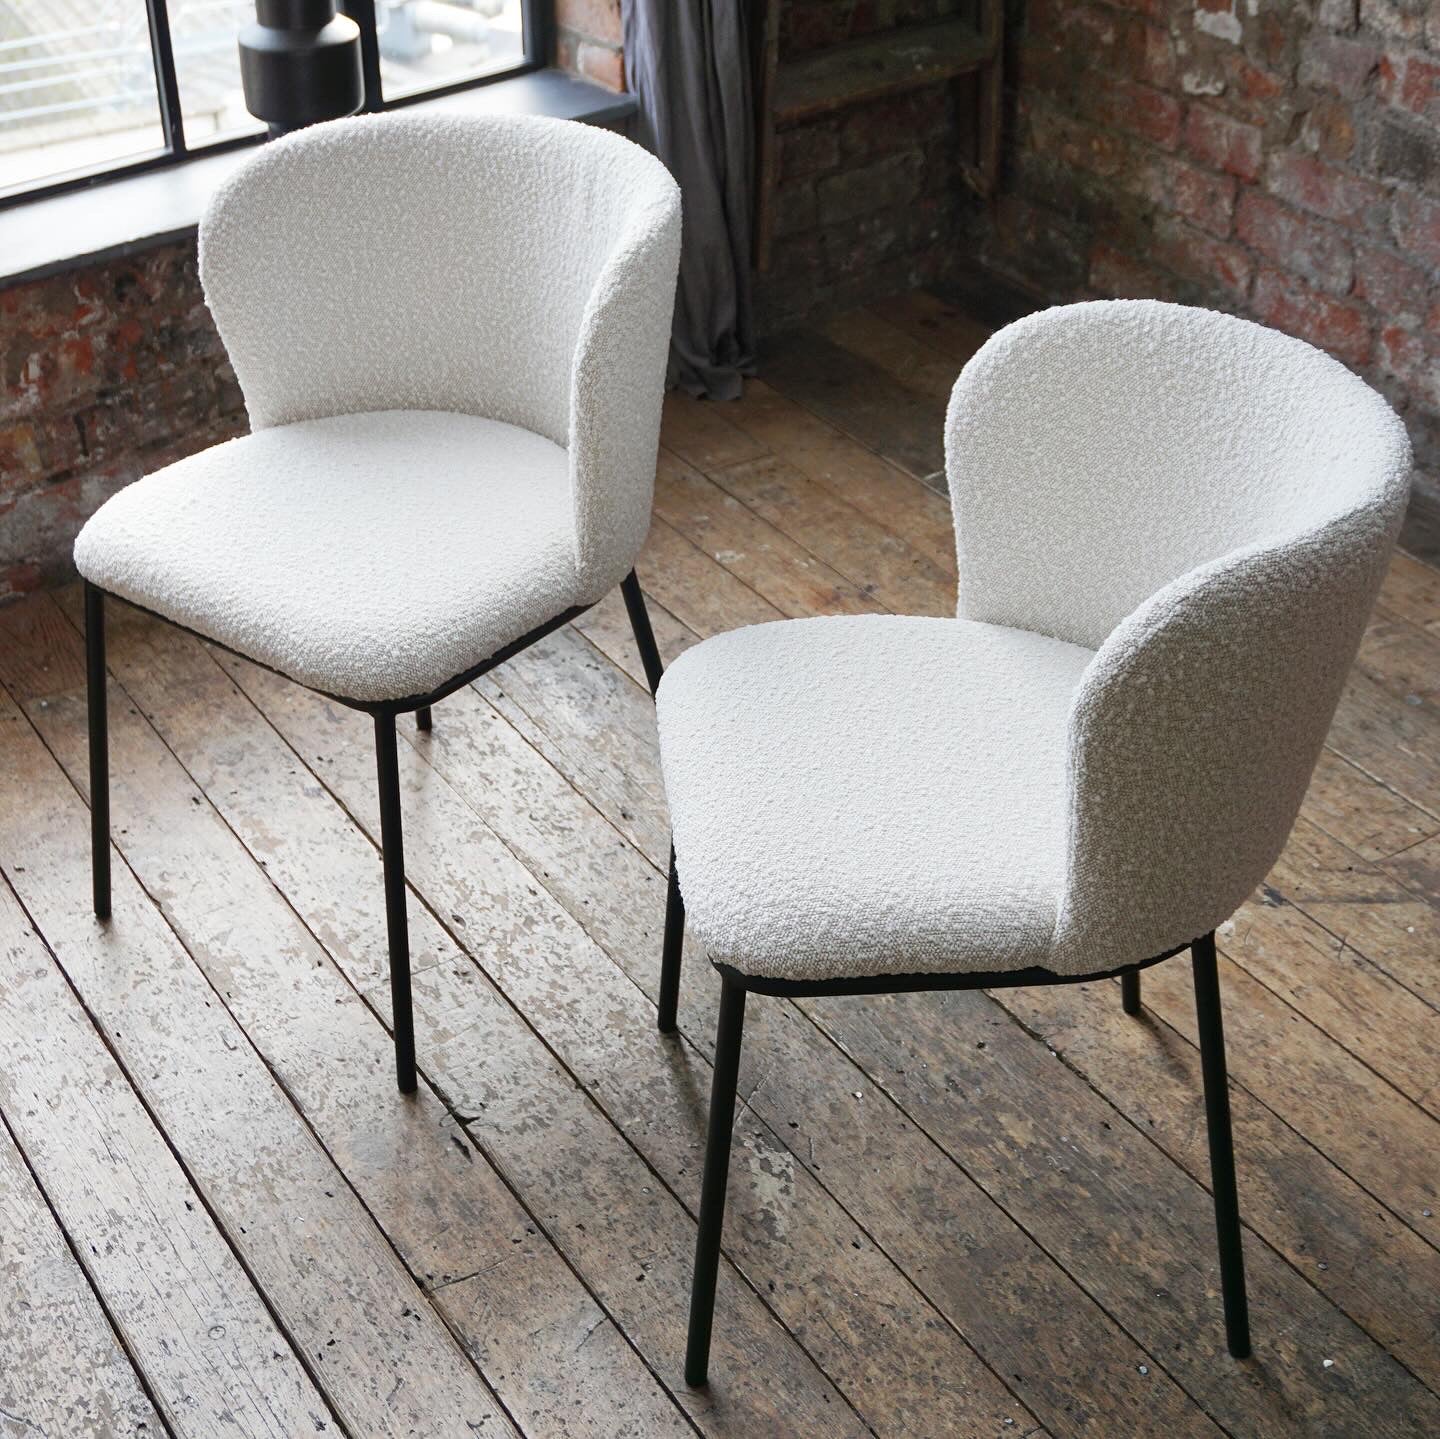 Mila Dining Chairs in Cream Boucle (2pk)